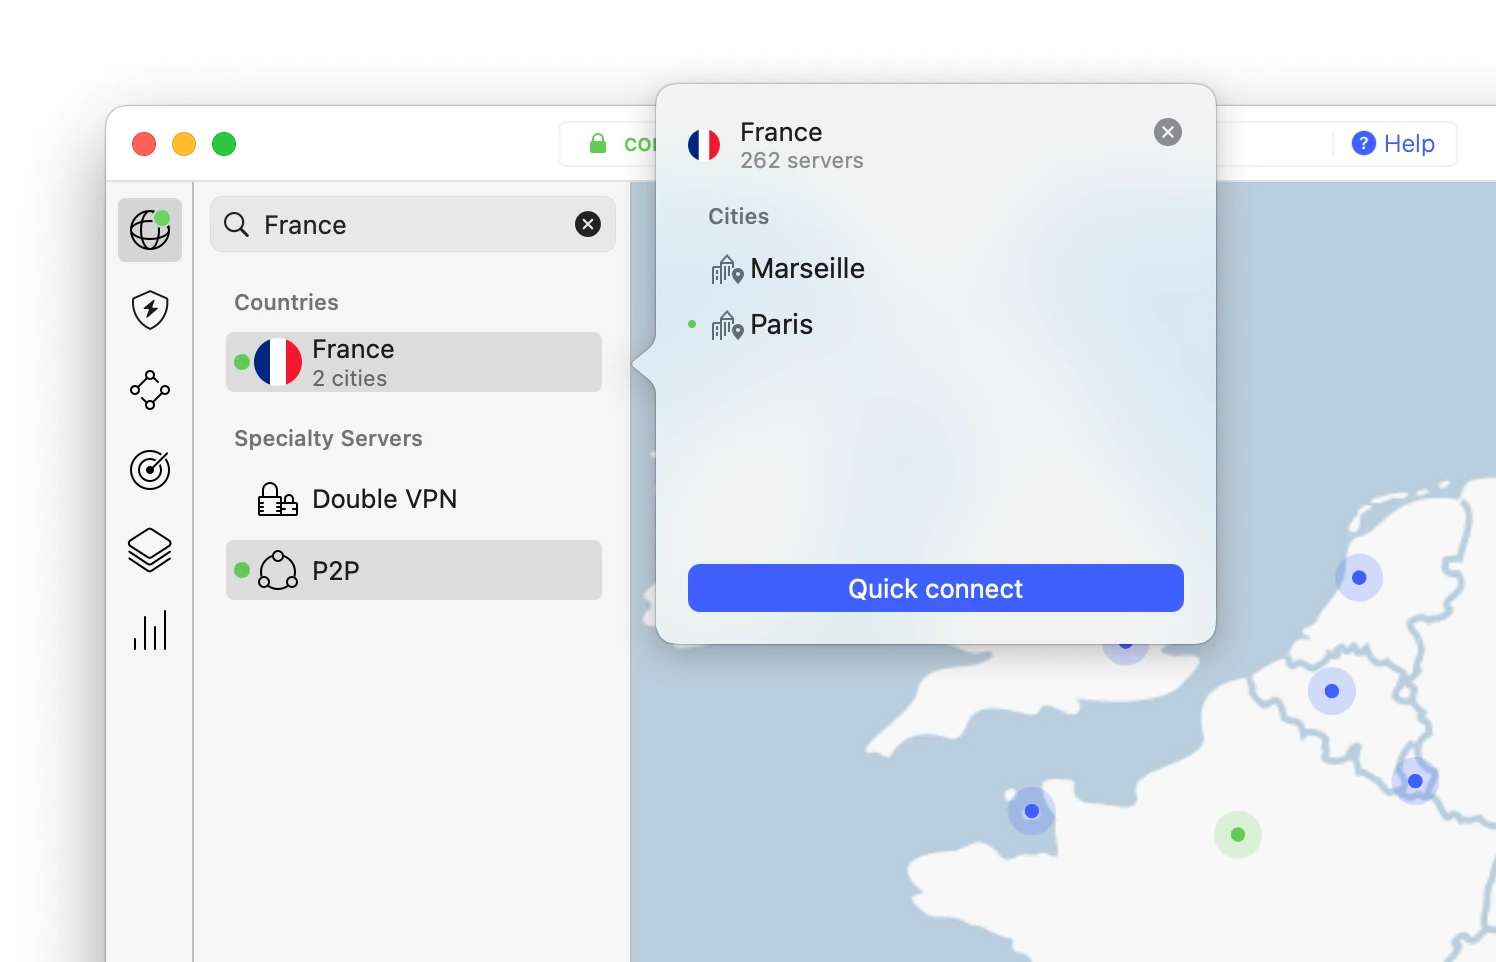 NordVPN has only two server locations in France